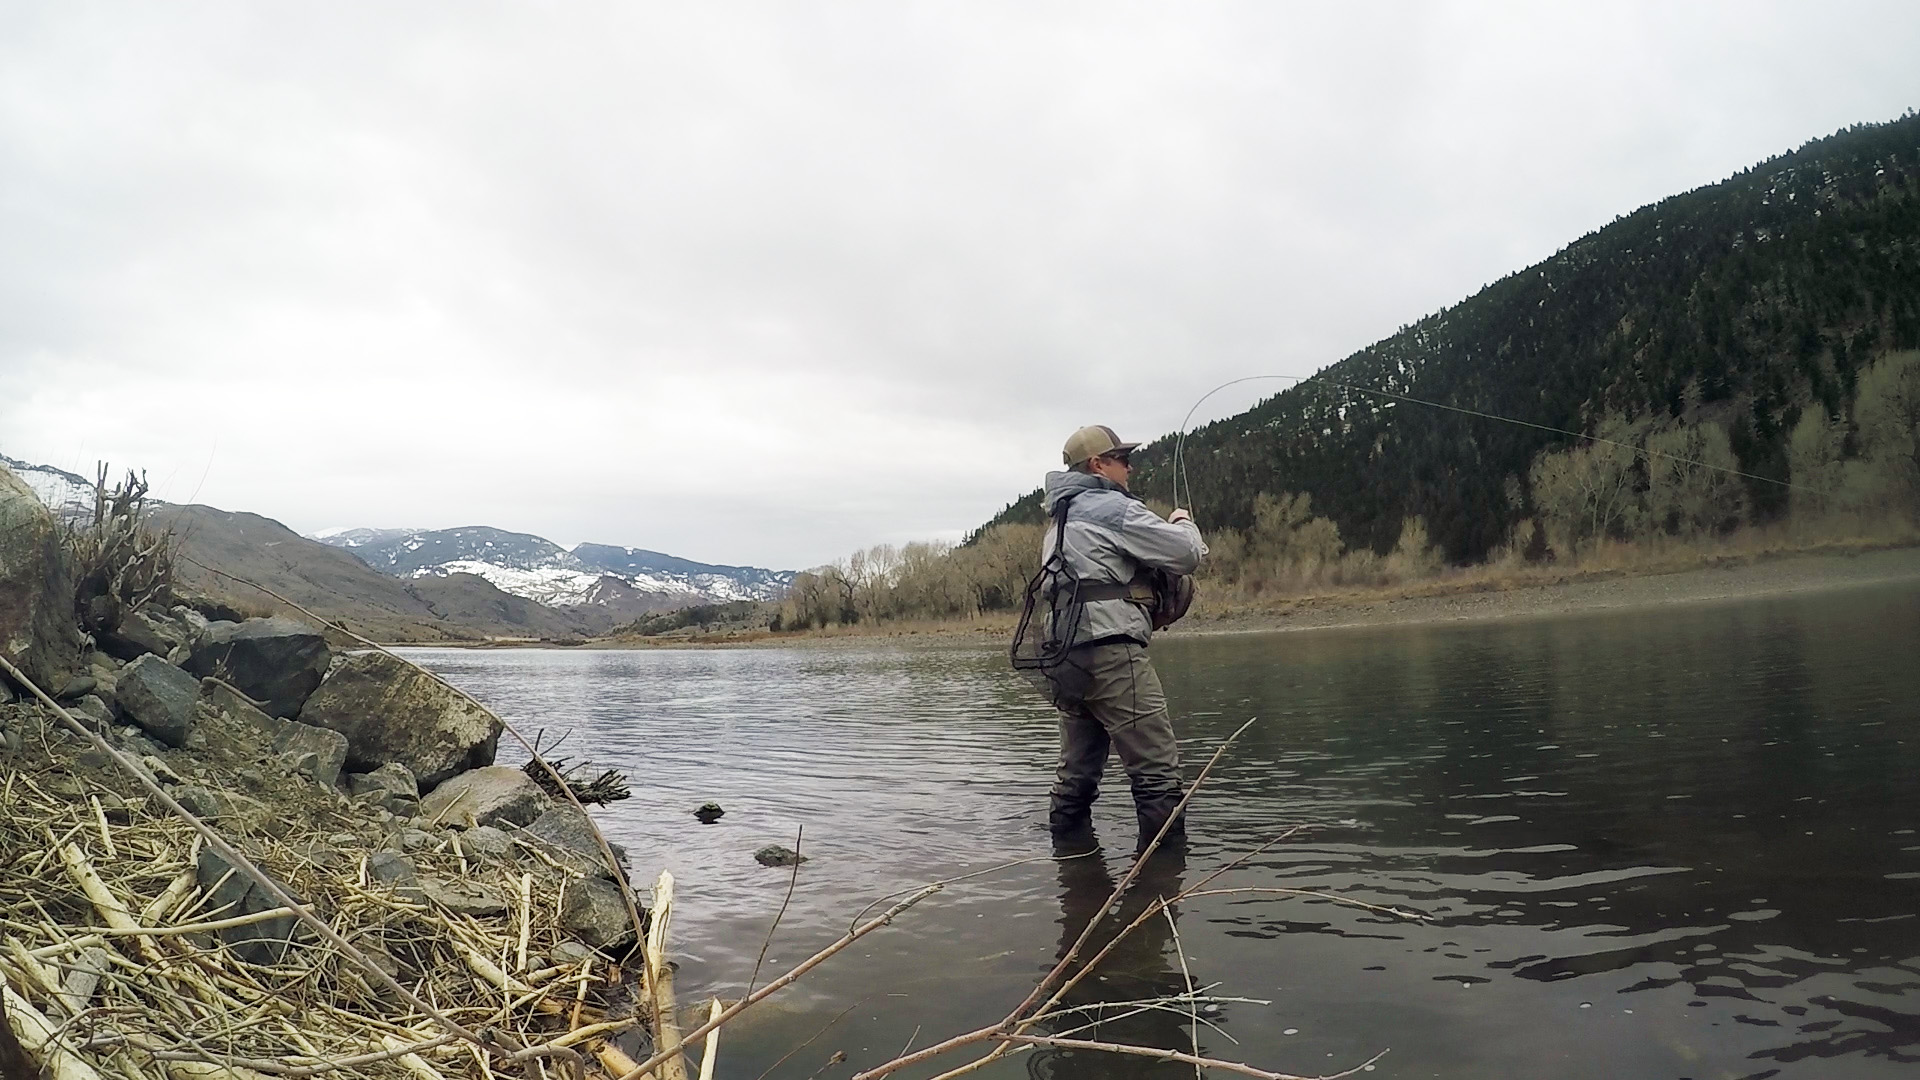 Wade Fishing the Yellowstone River - A Few Quick Tips - Sweetwater Fly Shop